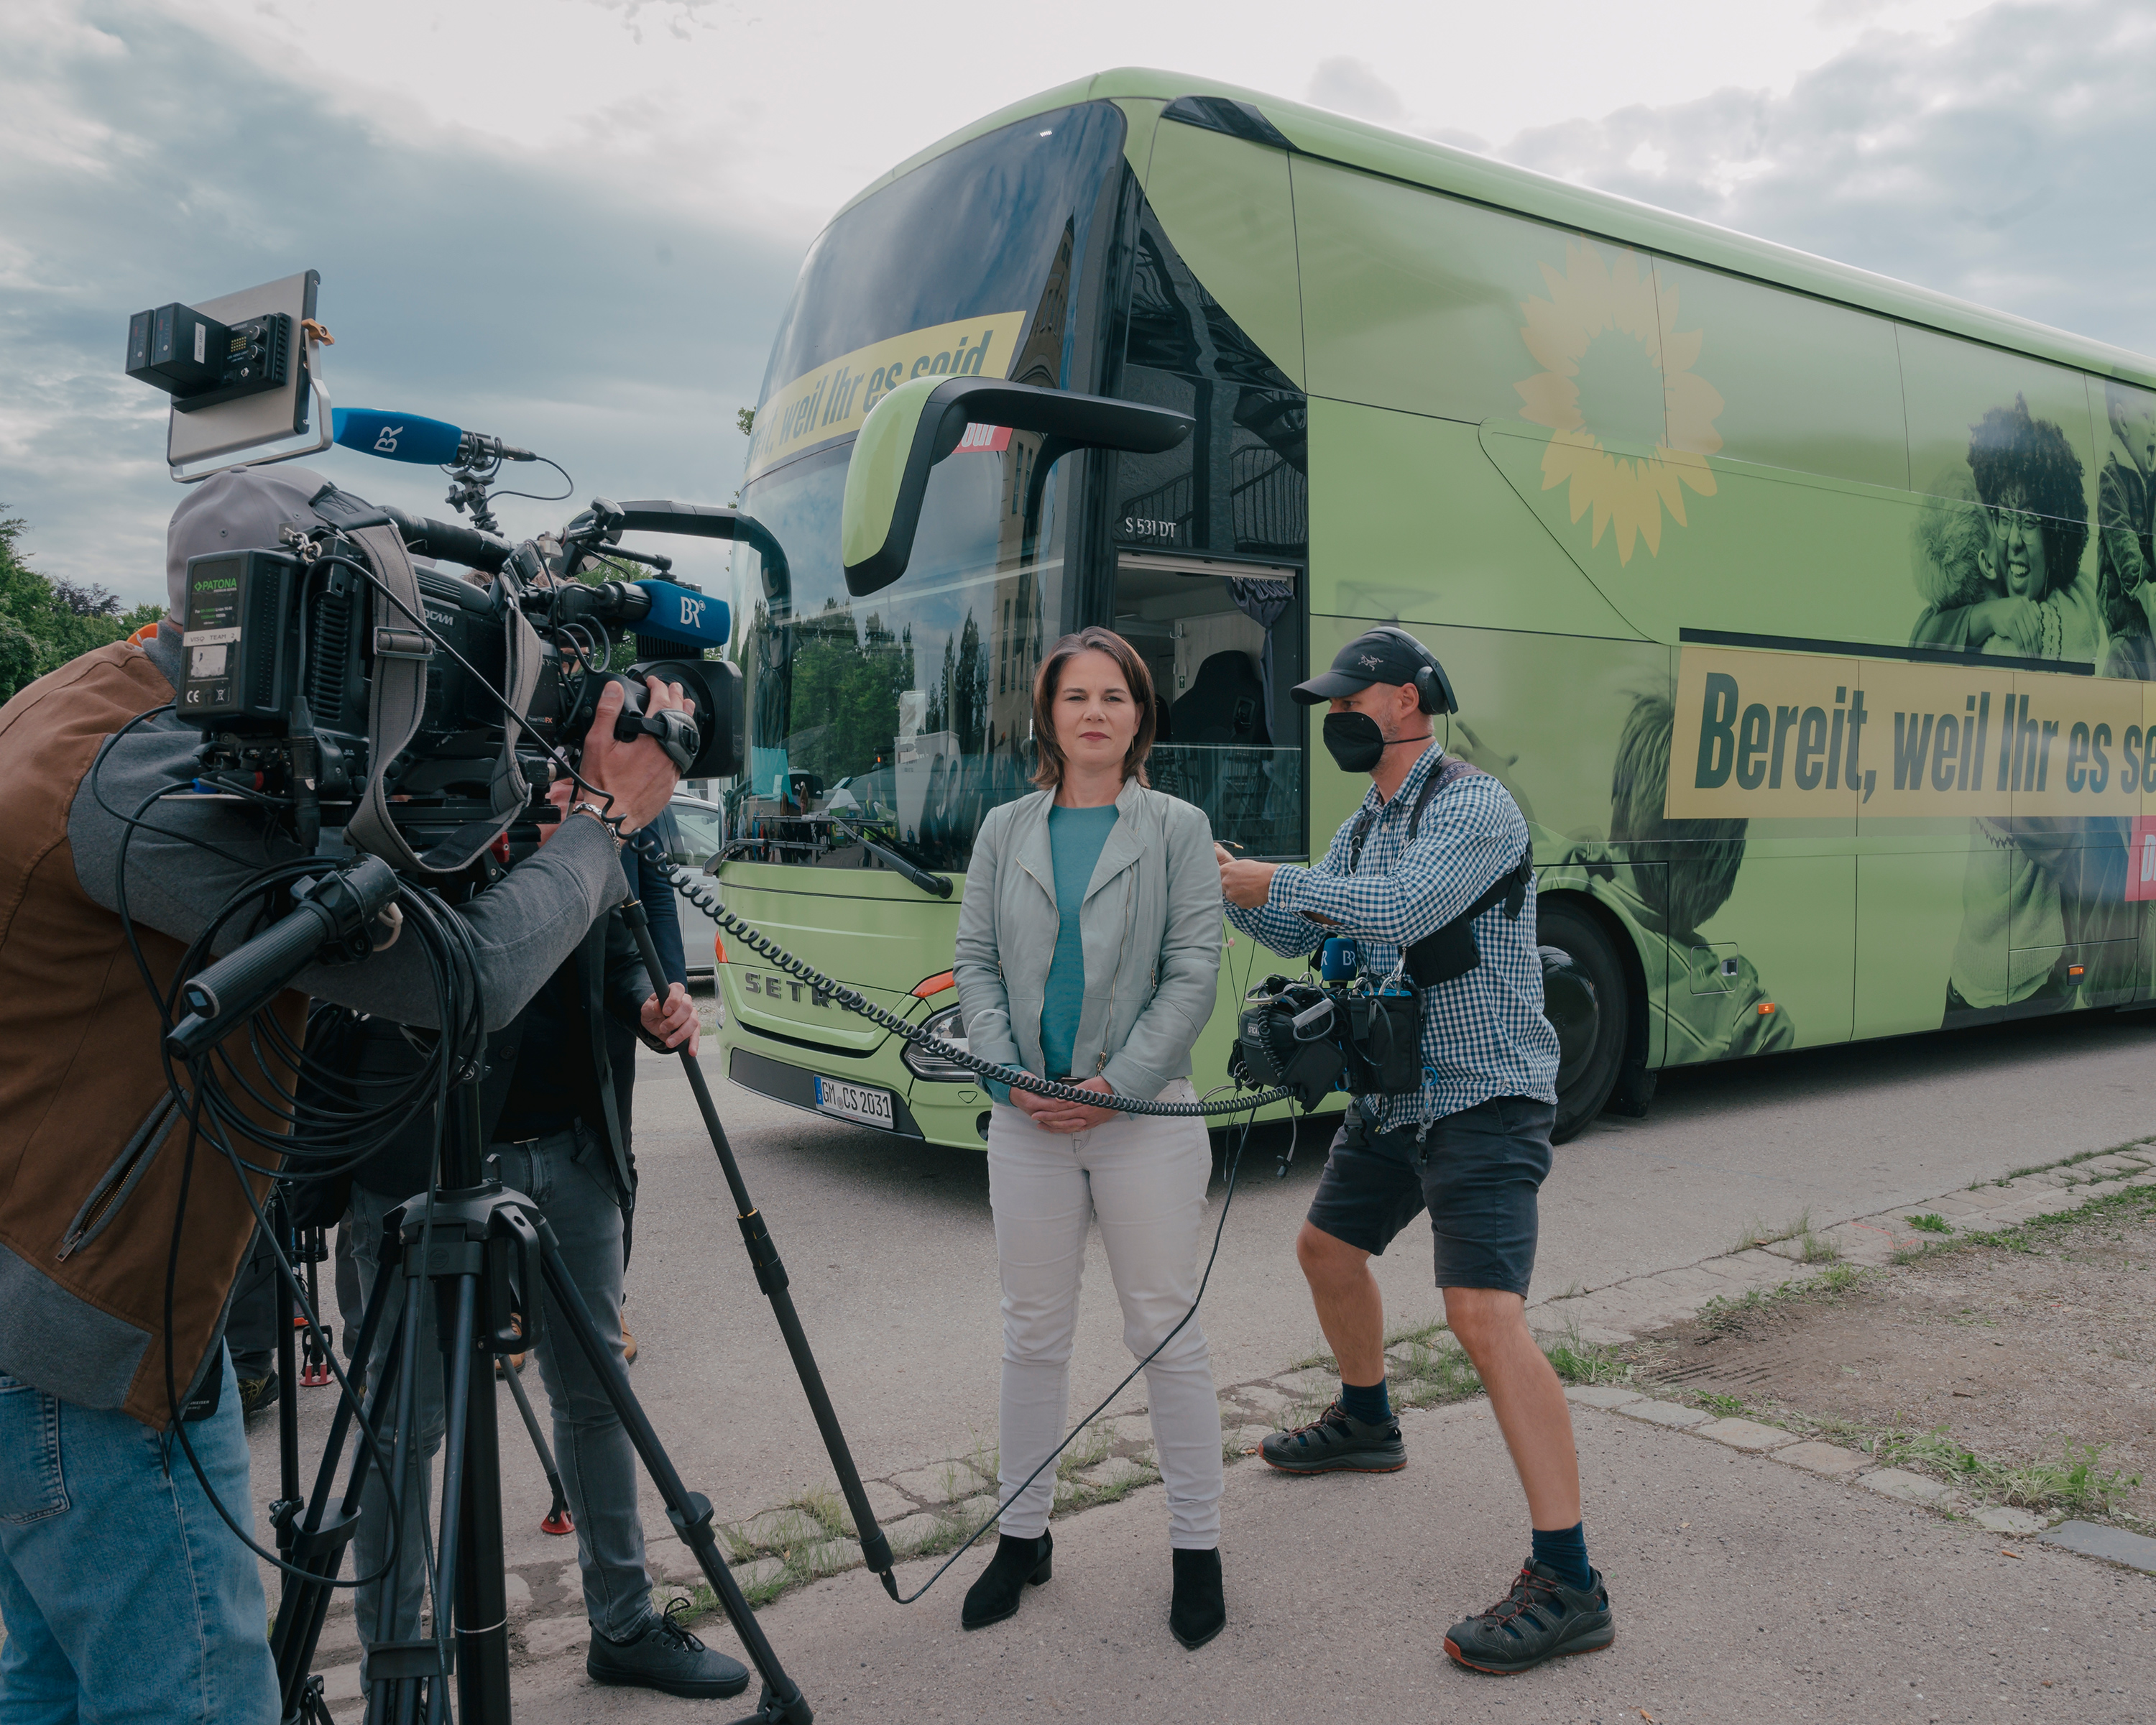 Annalena Baerbock of Alliance 90/The Greens (Bündniss 90/Die Grünen) gives interviews to German Media at a election campaign event in Dachau, Germany, on Aug. 17. (Ingmar Björn Nolting for TIME)